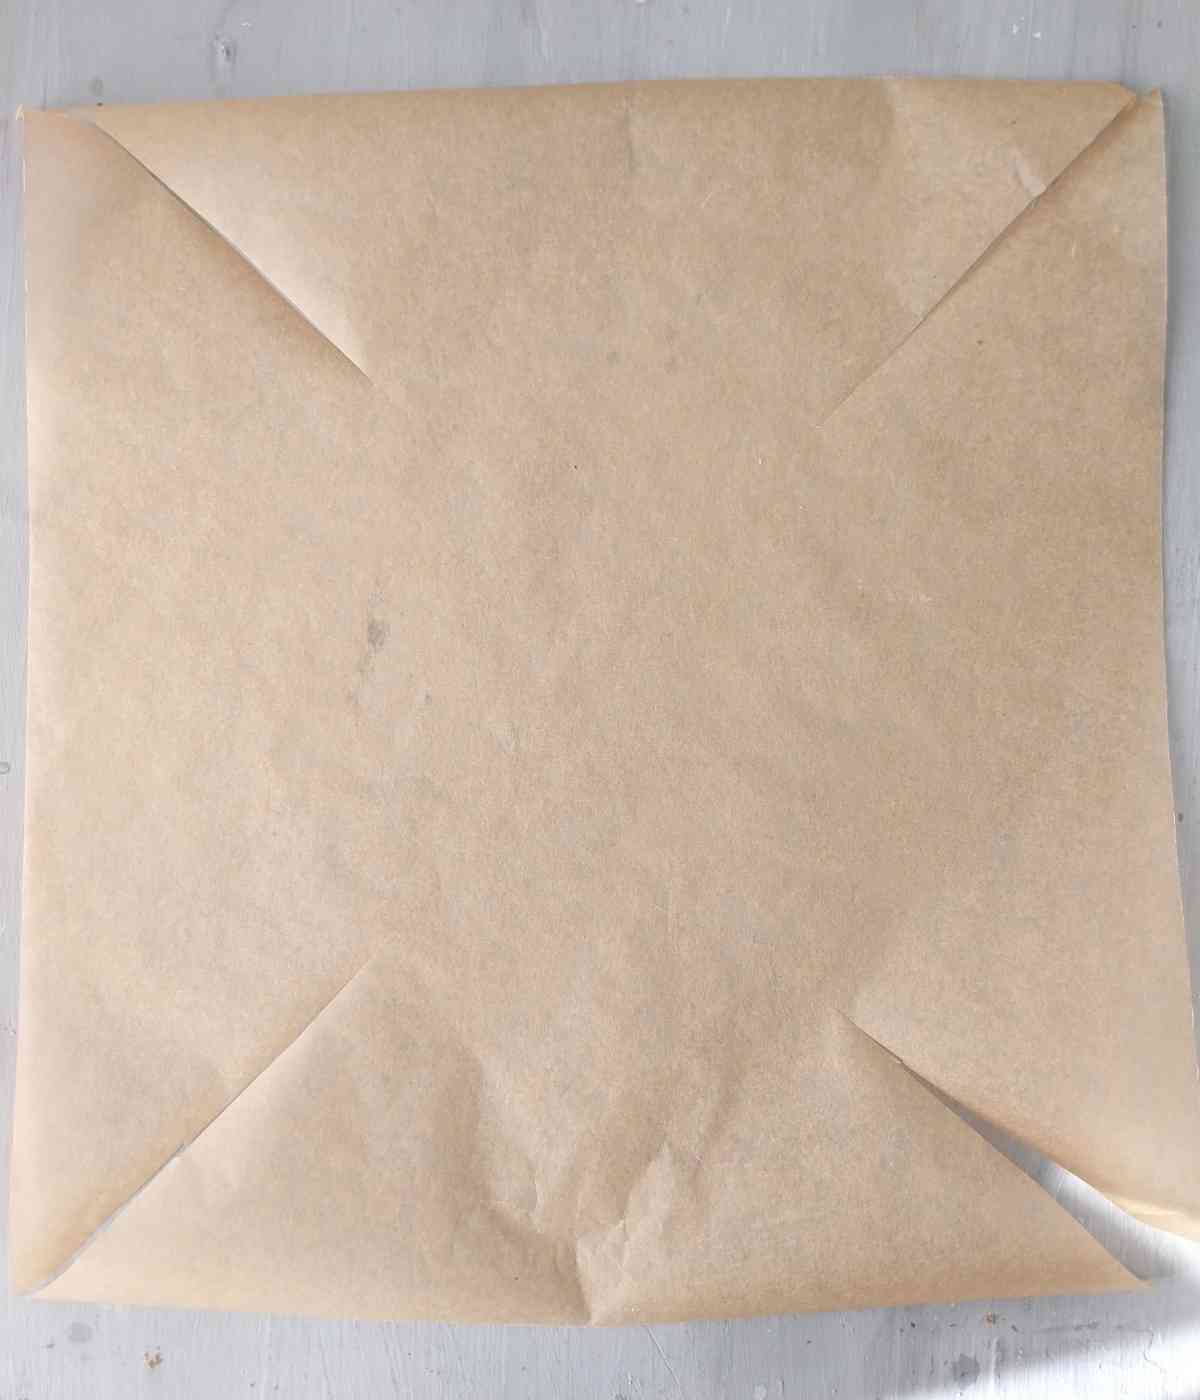 The piece of parchment paper cut on the corners.